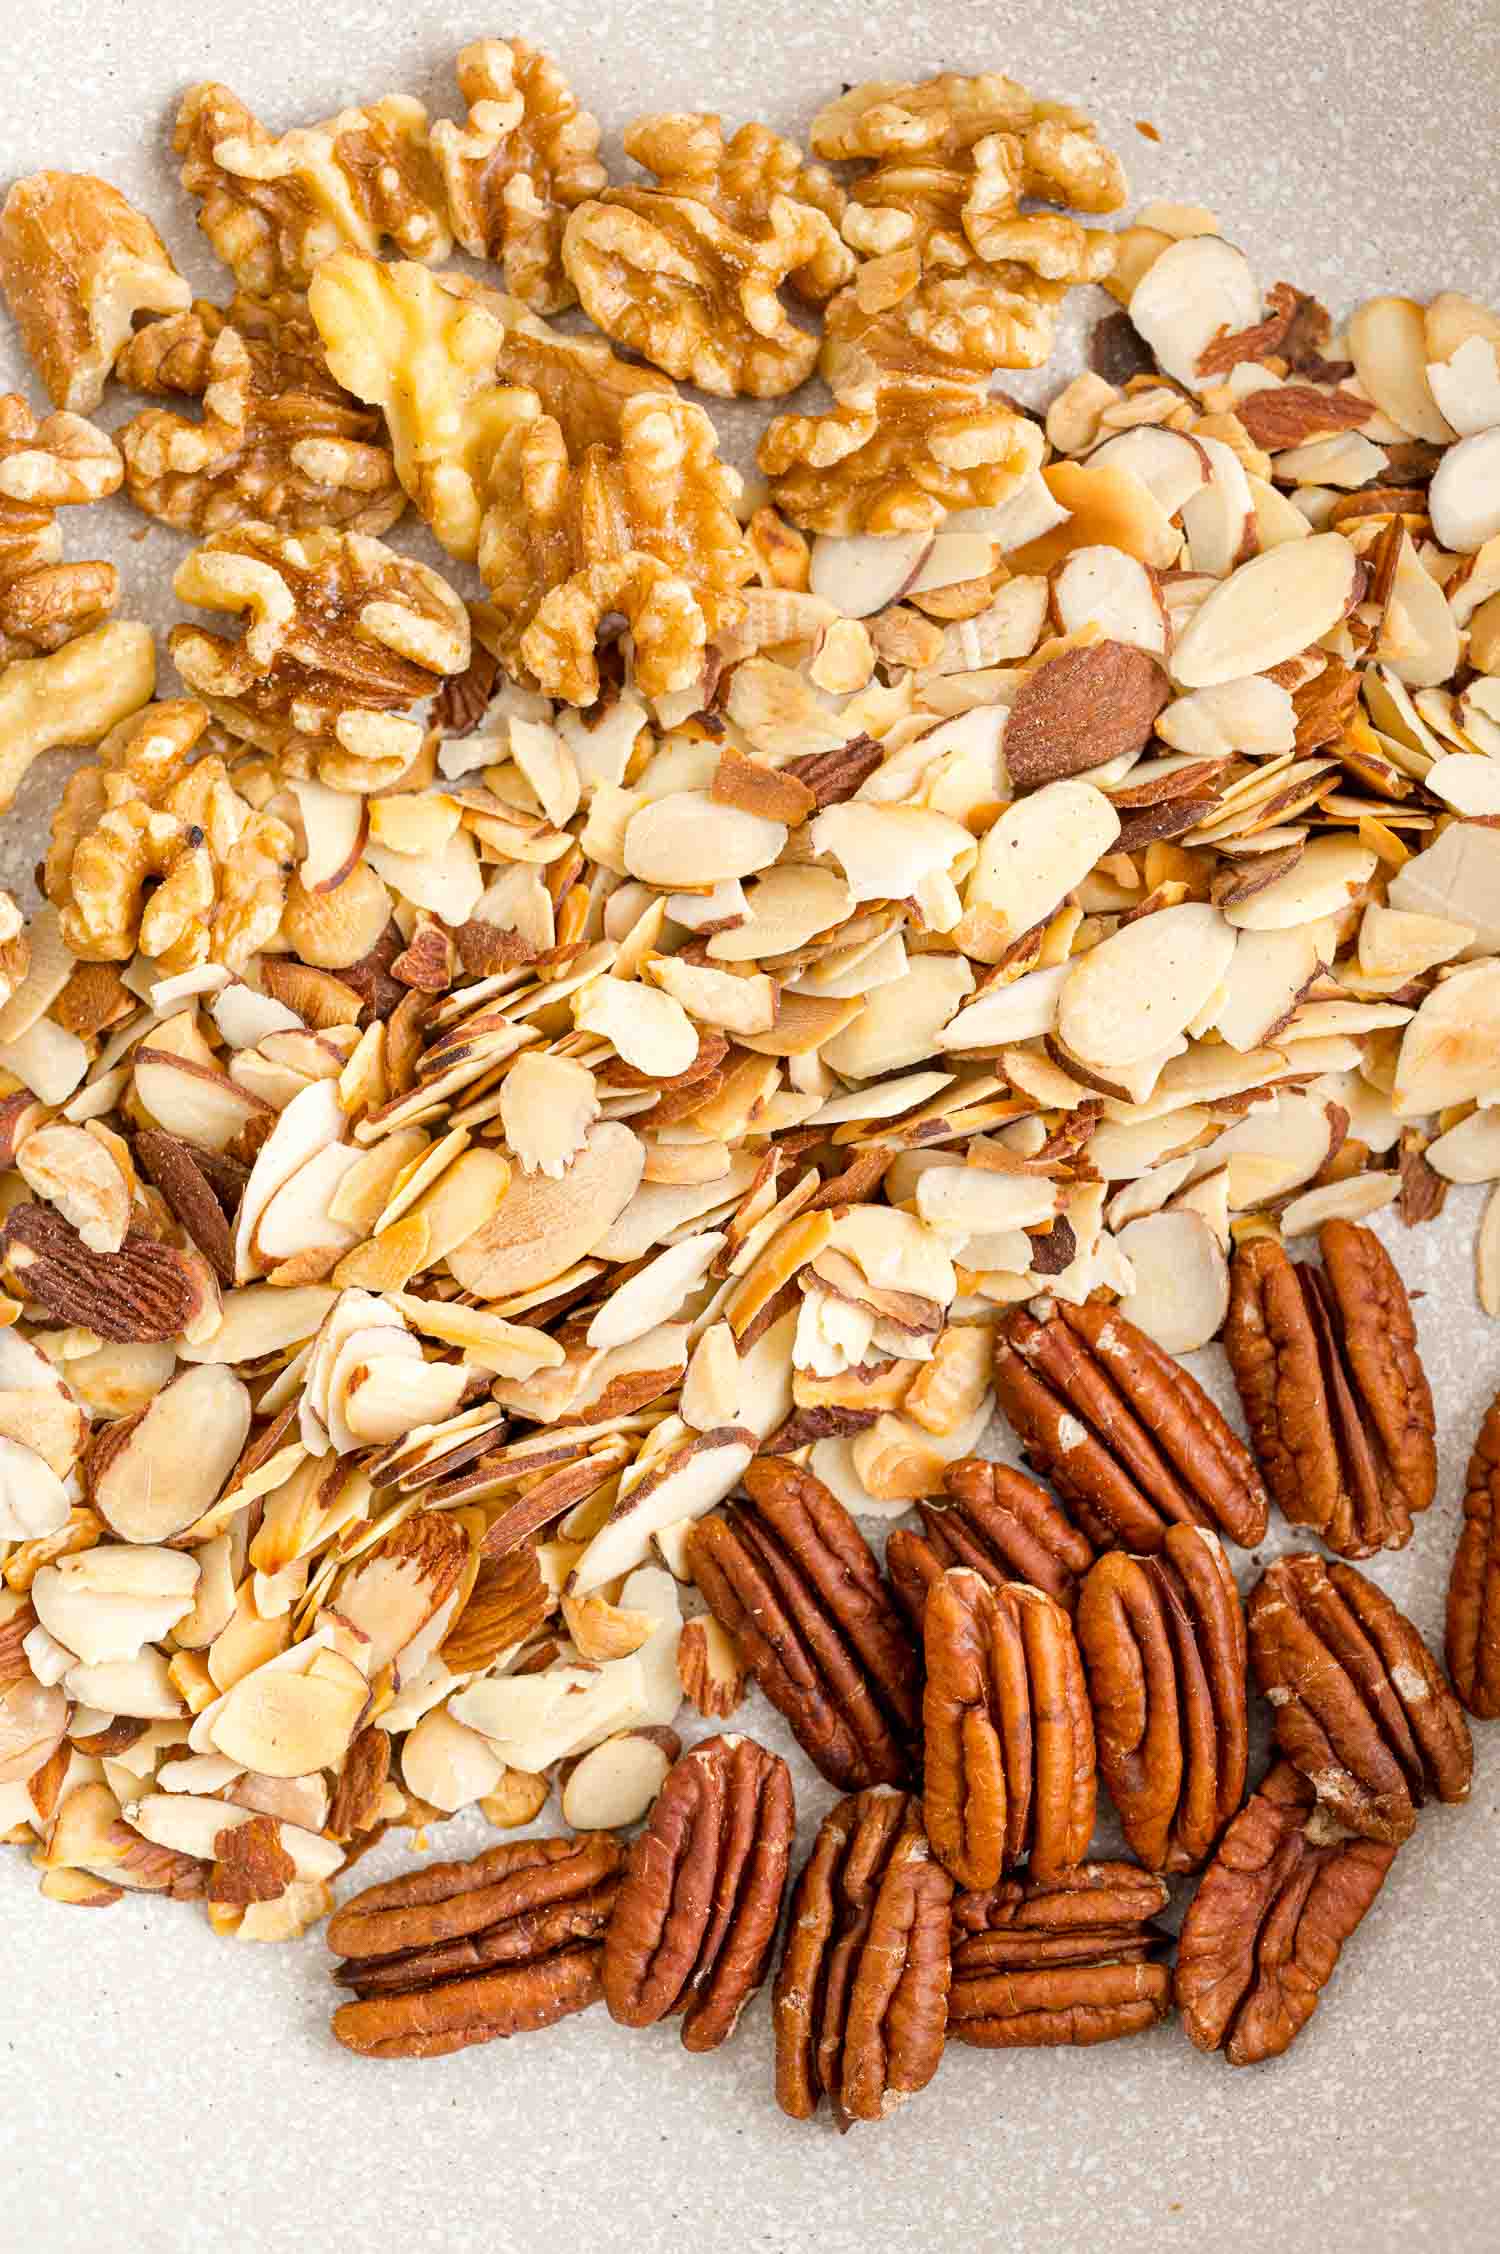 Toasted almonds, walnuts, and pecans in a bowl.